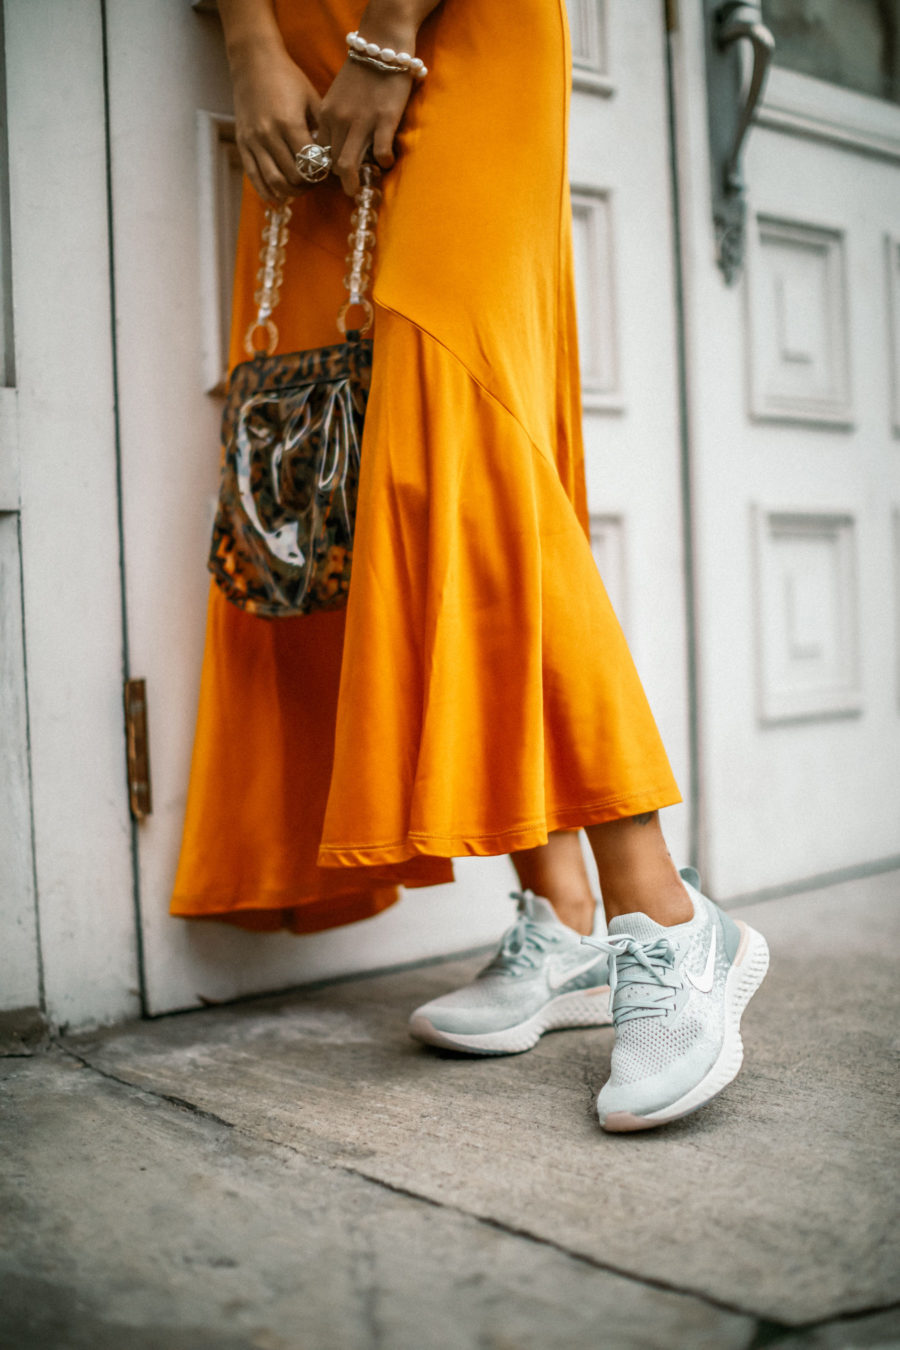 How to Wear Sneakers from Day to Night - Yellow Slip Dress sneakers, Nike Epic React Sneakers, fashion sneakers // Notjessfashion.com